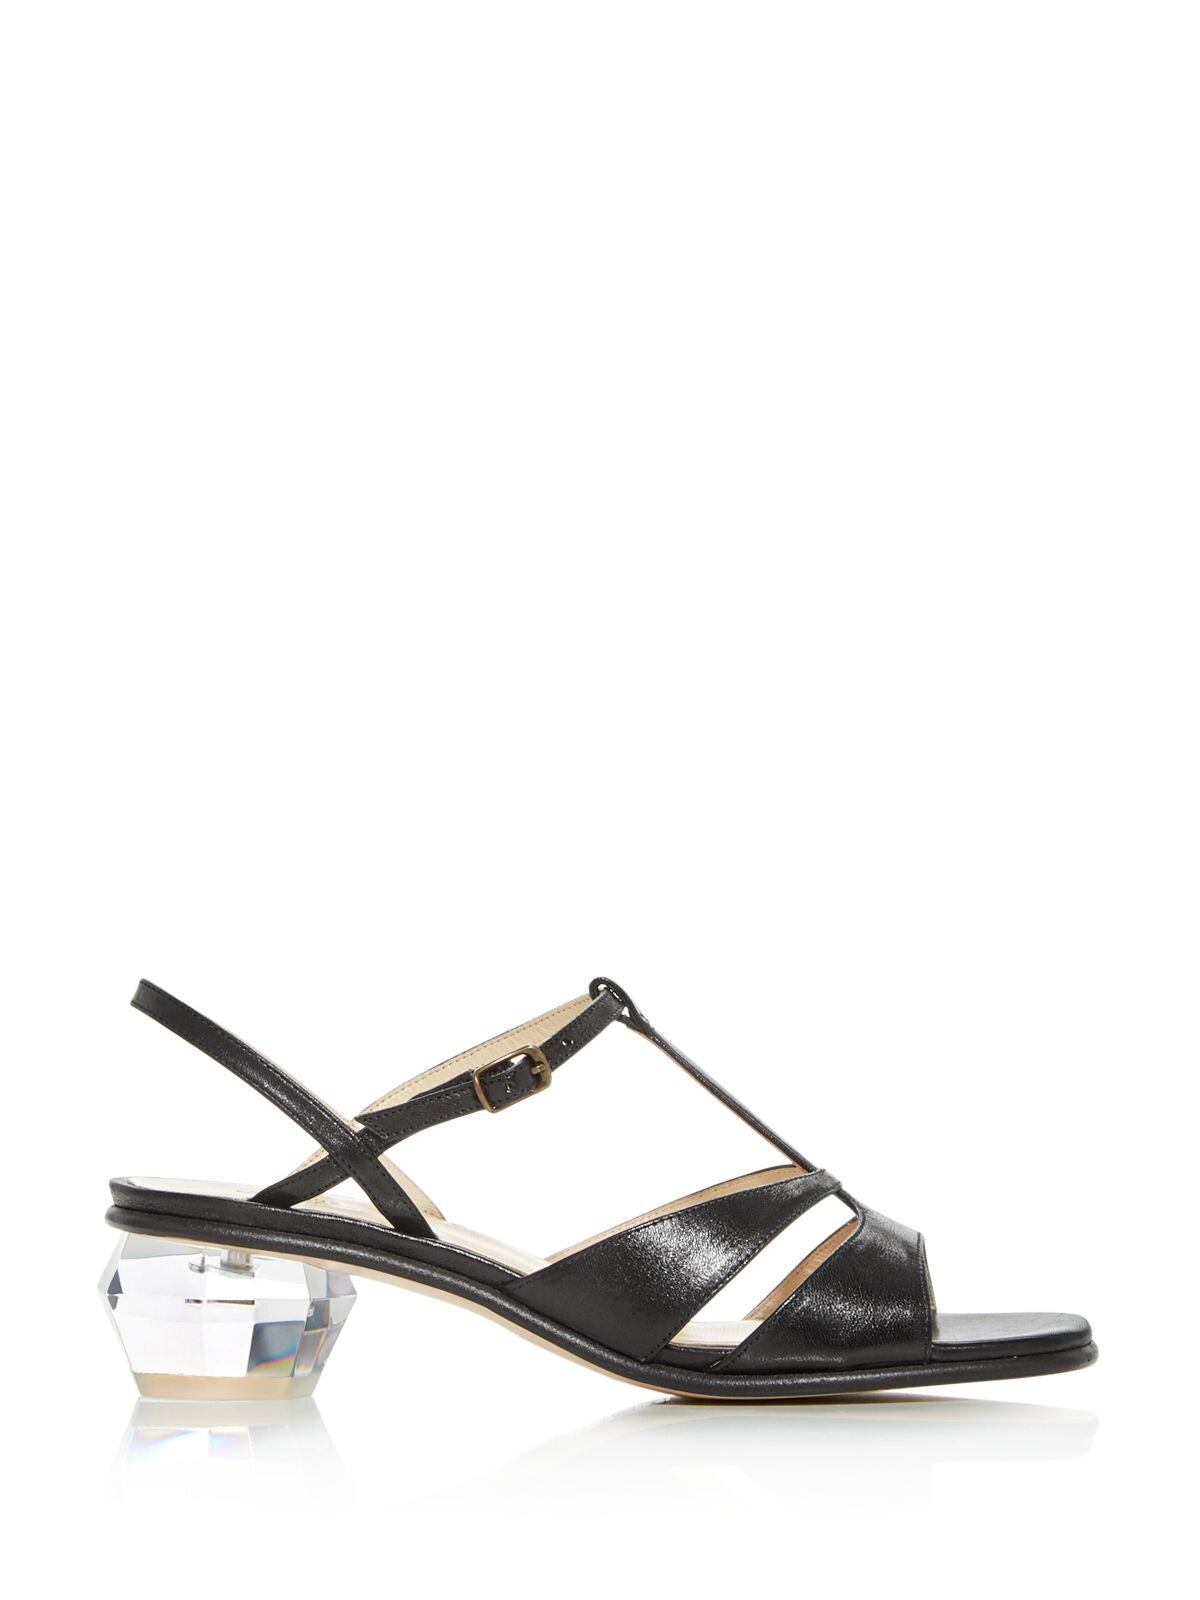 MARC JACOBS Womens Black T-Strap Strappy The Gem Square Toe Sculpted Heel Buckle Leather Slingback Sandal 39.5